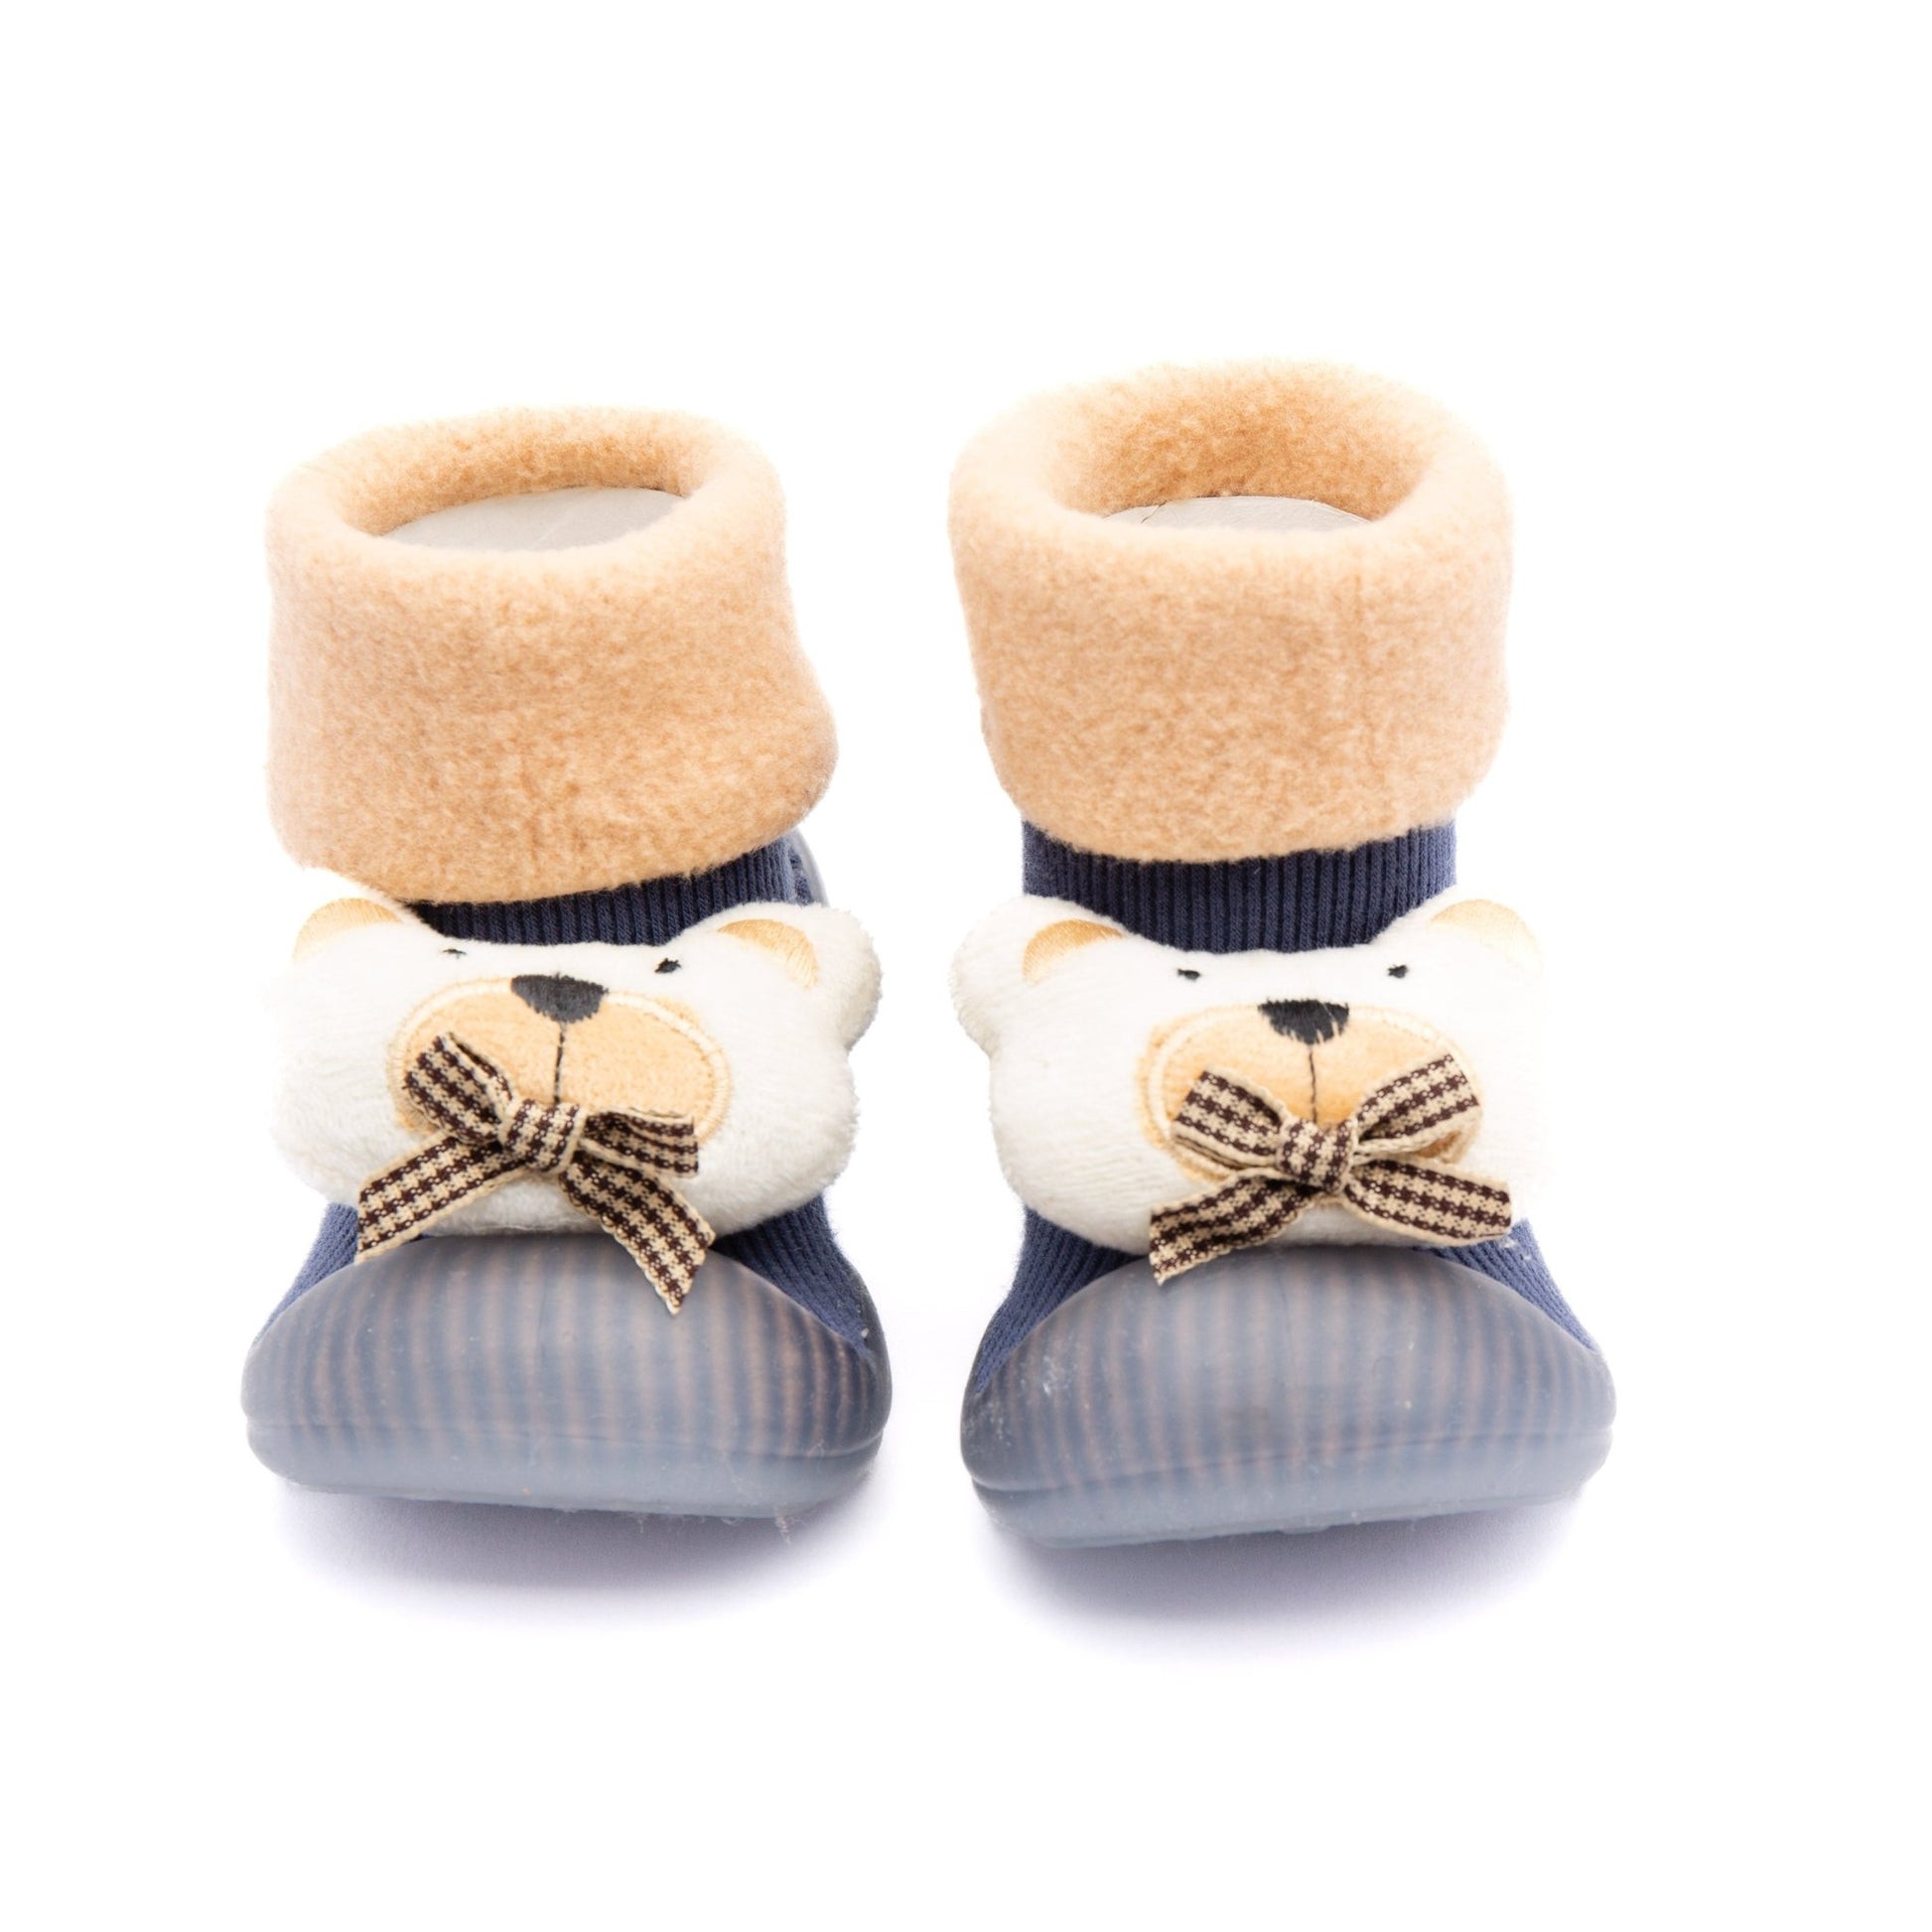 Pop Up Teddy by Bearba- Sock Shoes for Babies & Toddlers Sizes-S,M,L- Flexible Soles, Machine Washable,Warm-Blue - Bearba